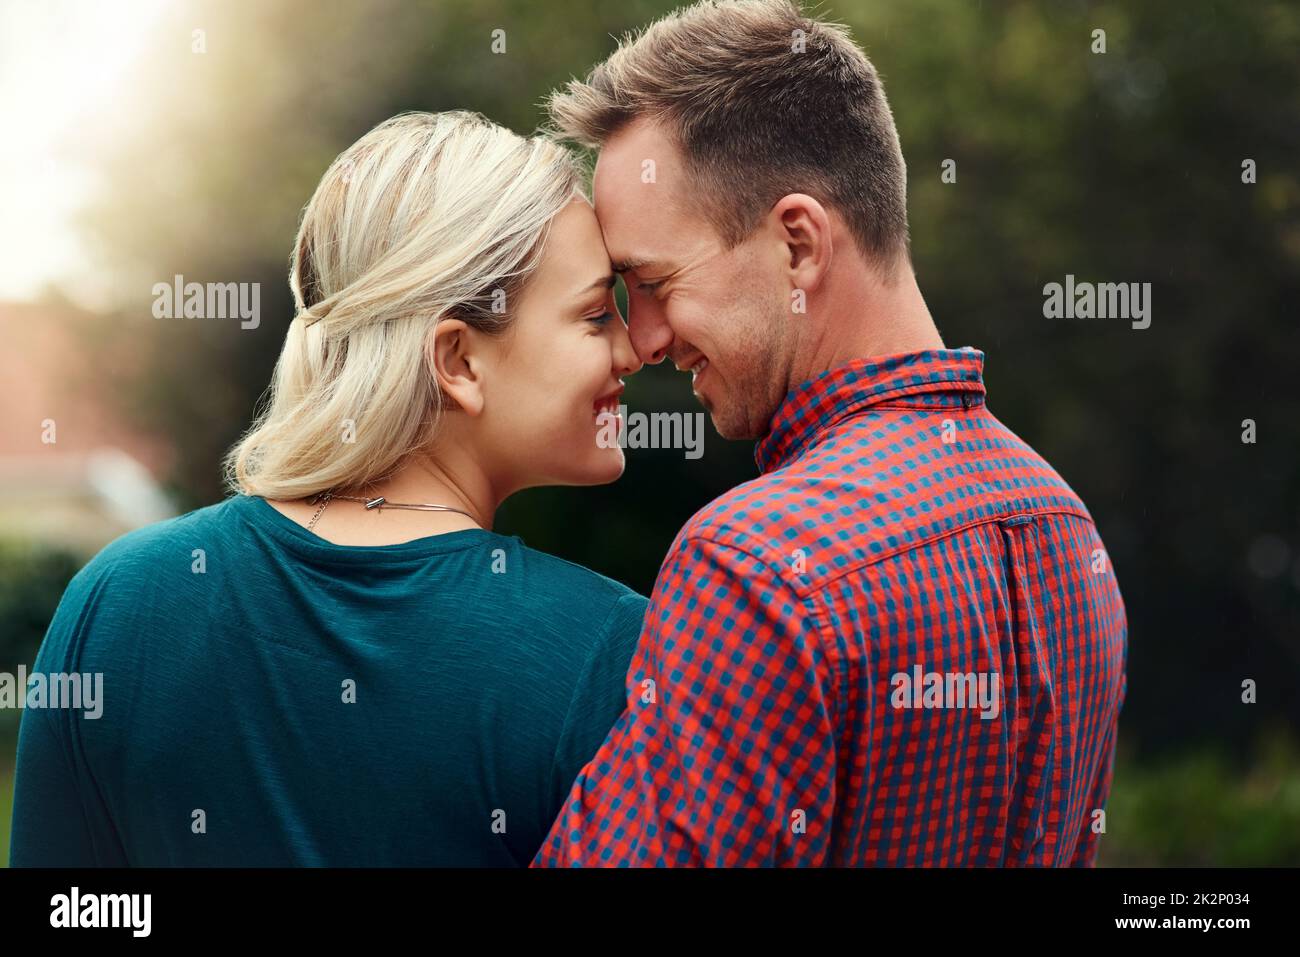 You can tell theyre madly in love. Shot of an affectionate young couple spending quality time together outdoors. Stock Photo